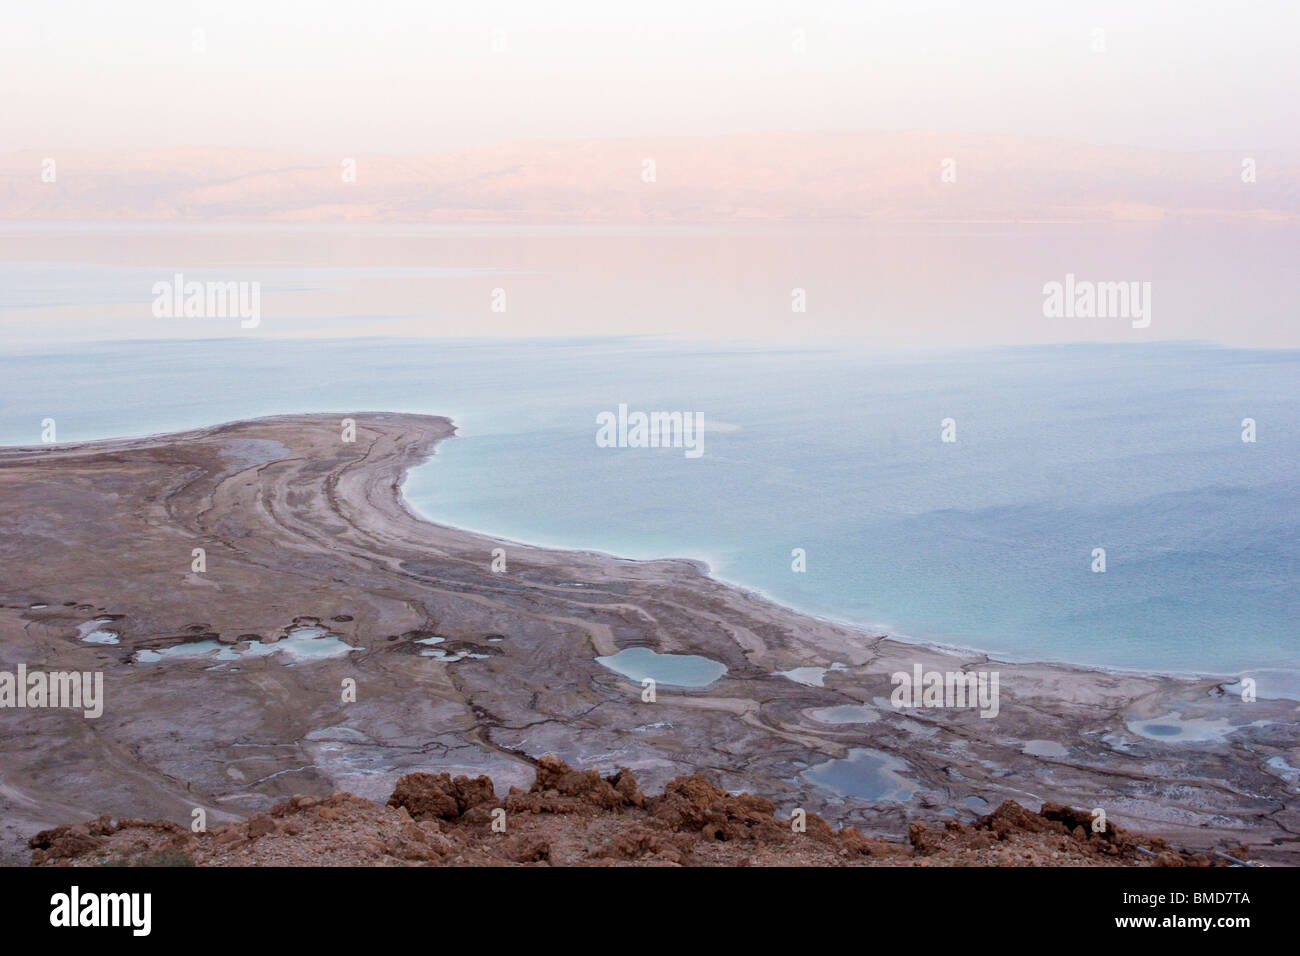 A view of the Dead sea at sunset, On Nov 3, 2008. The rapidly receding water (Approx. 5 cm per month) and sinkholes can be seen Stock Photo